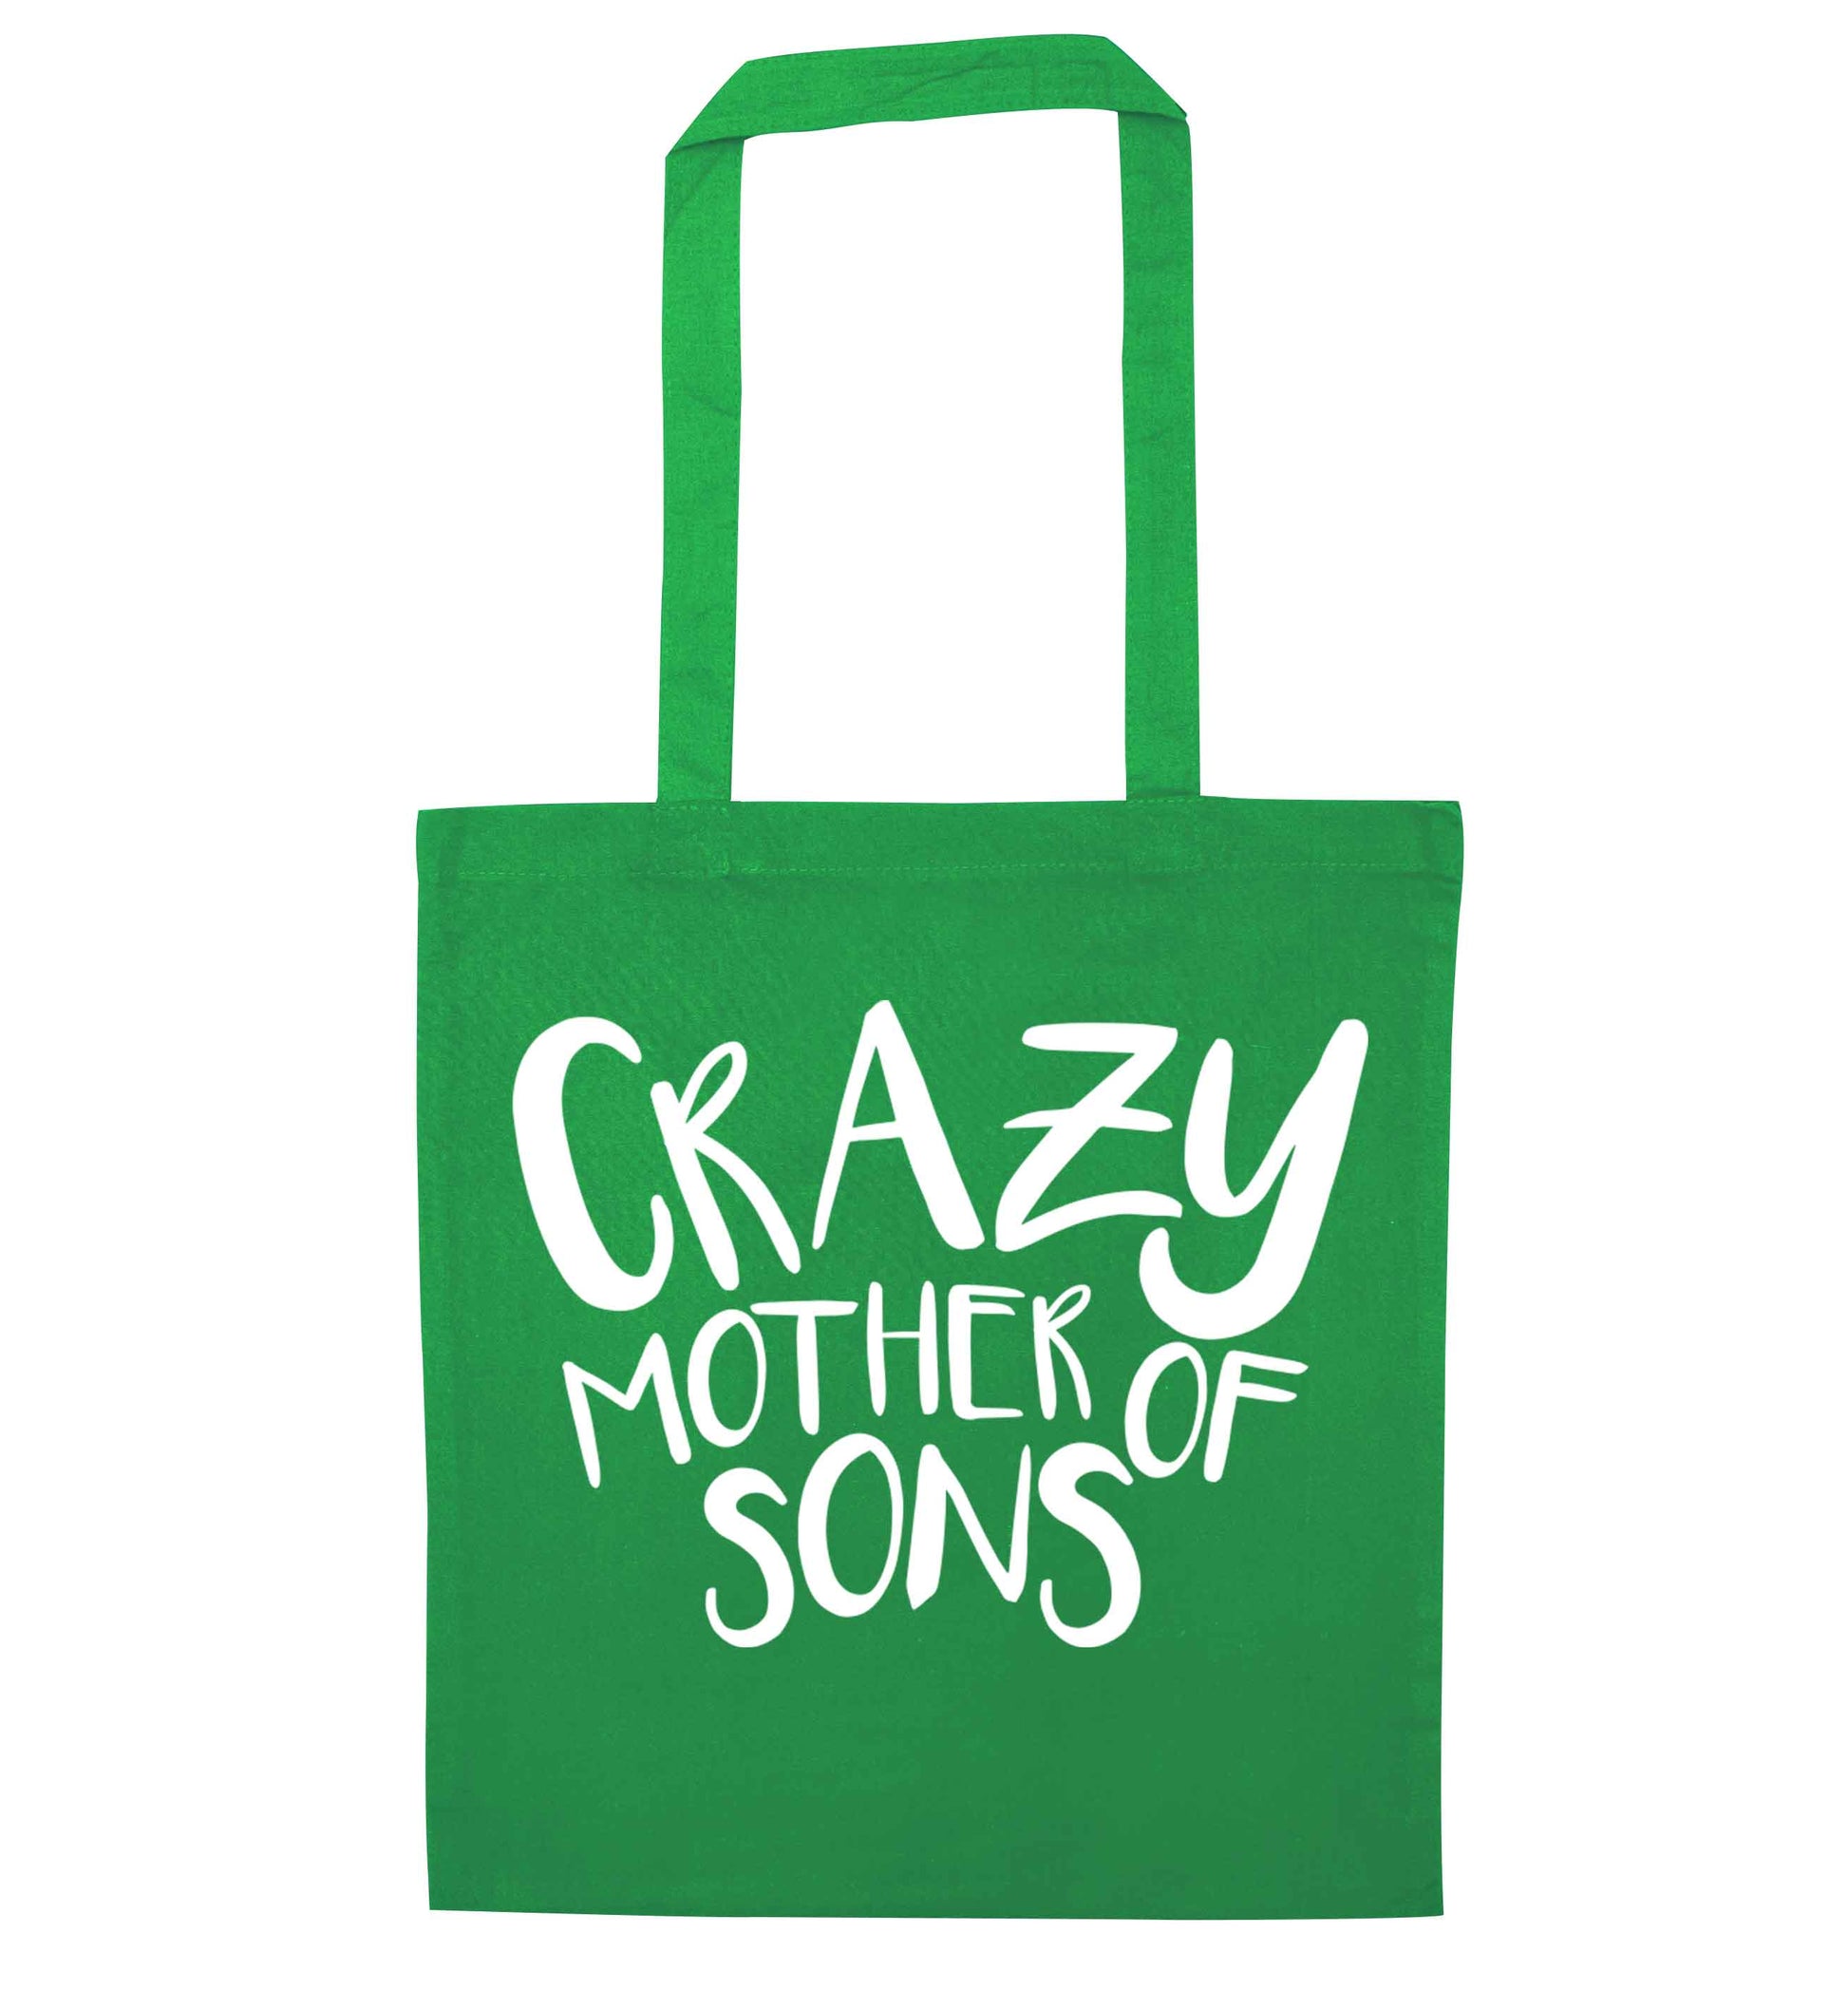 Crazy mother of sons green tote bag